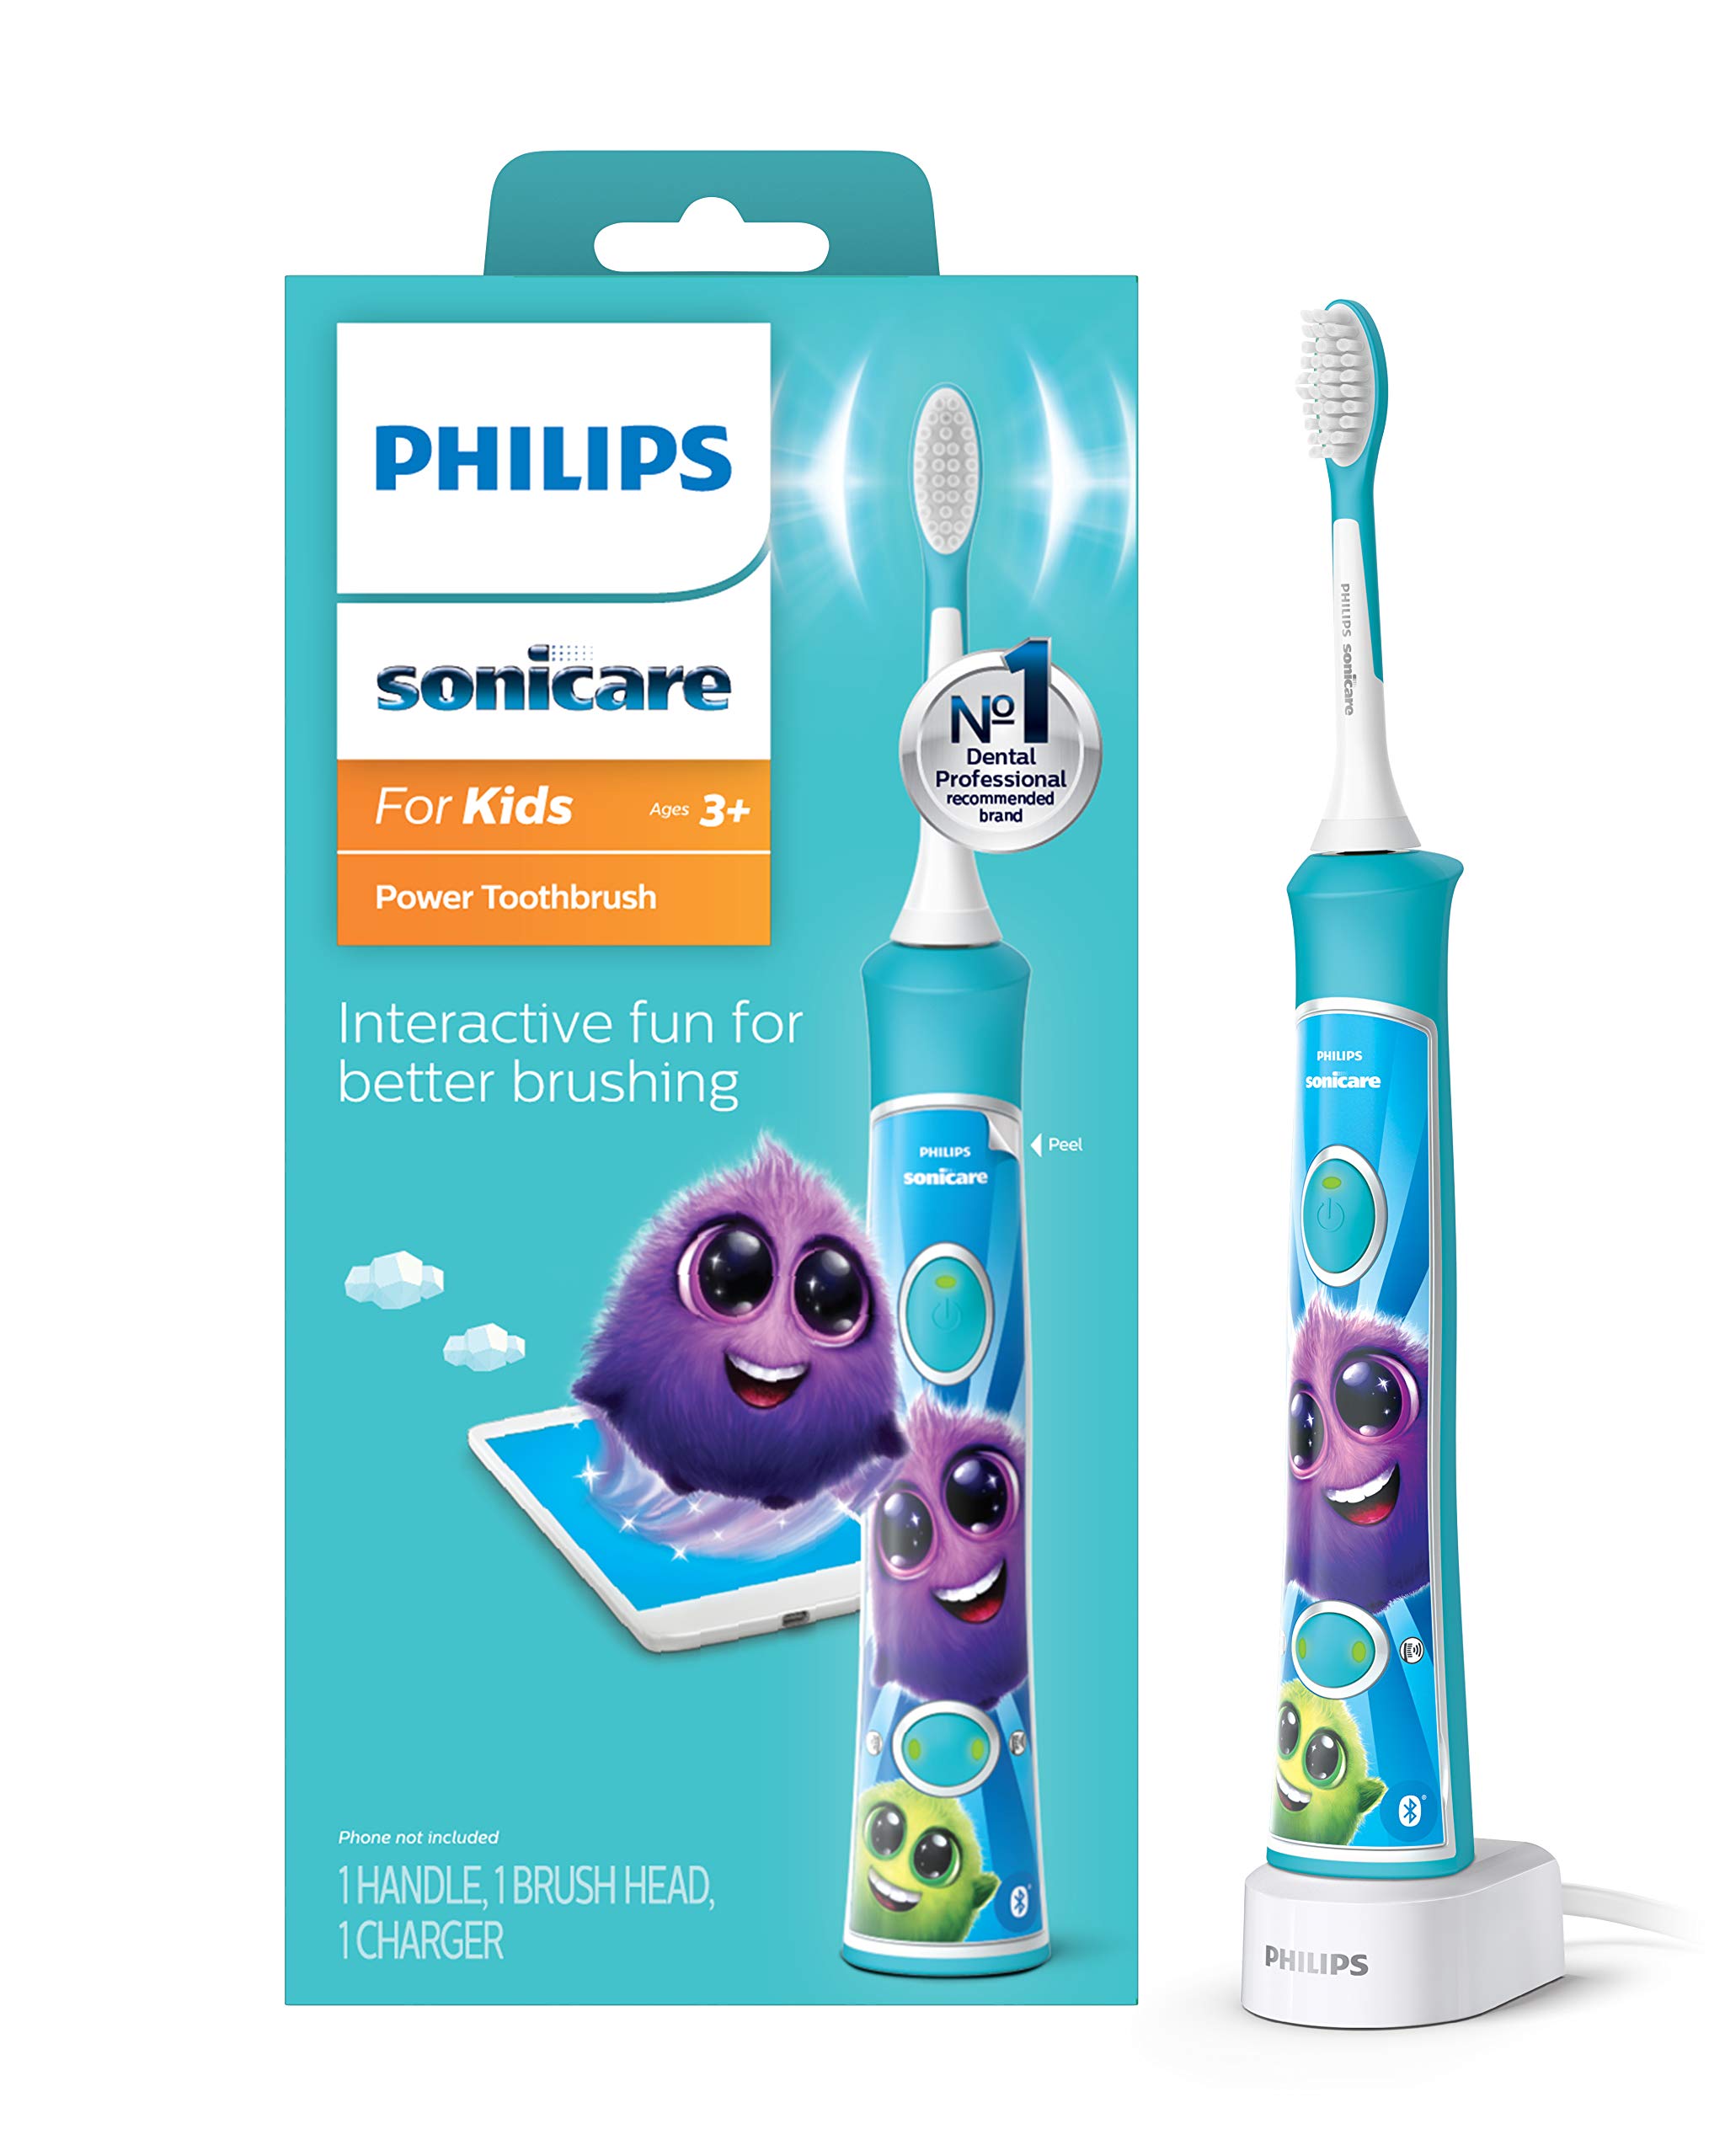 Philips Sonicare For Kids Bluetooth Rechargeable Electric Toothbrush (Turquoise) $25 + Free Shipping w/ Prime or on $25+